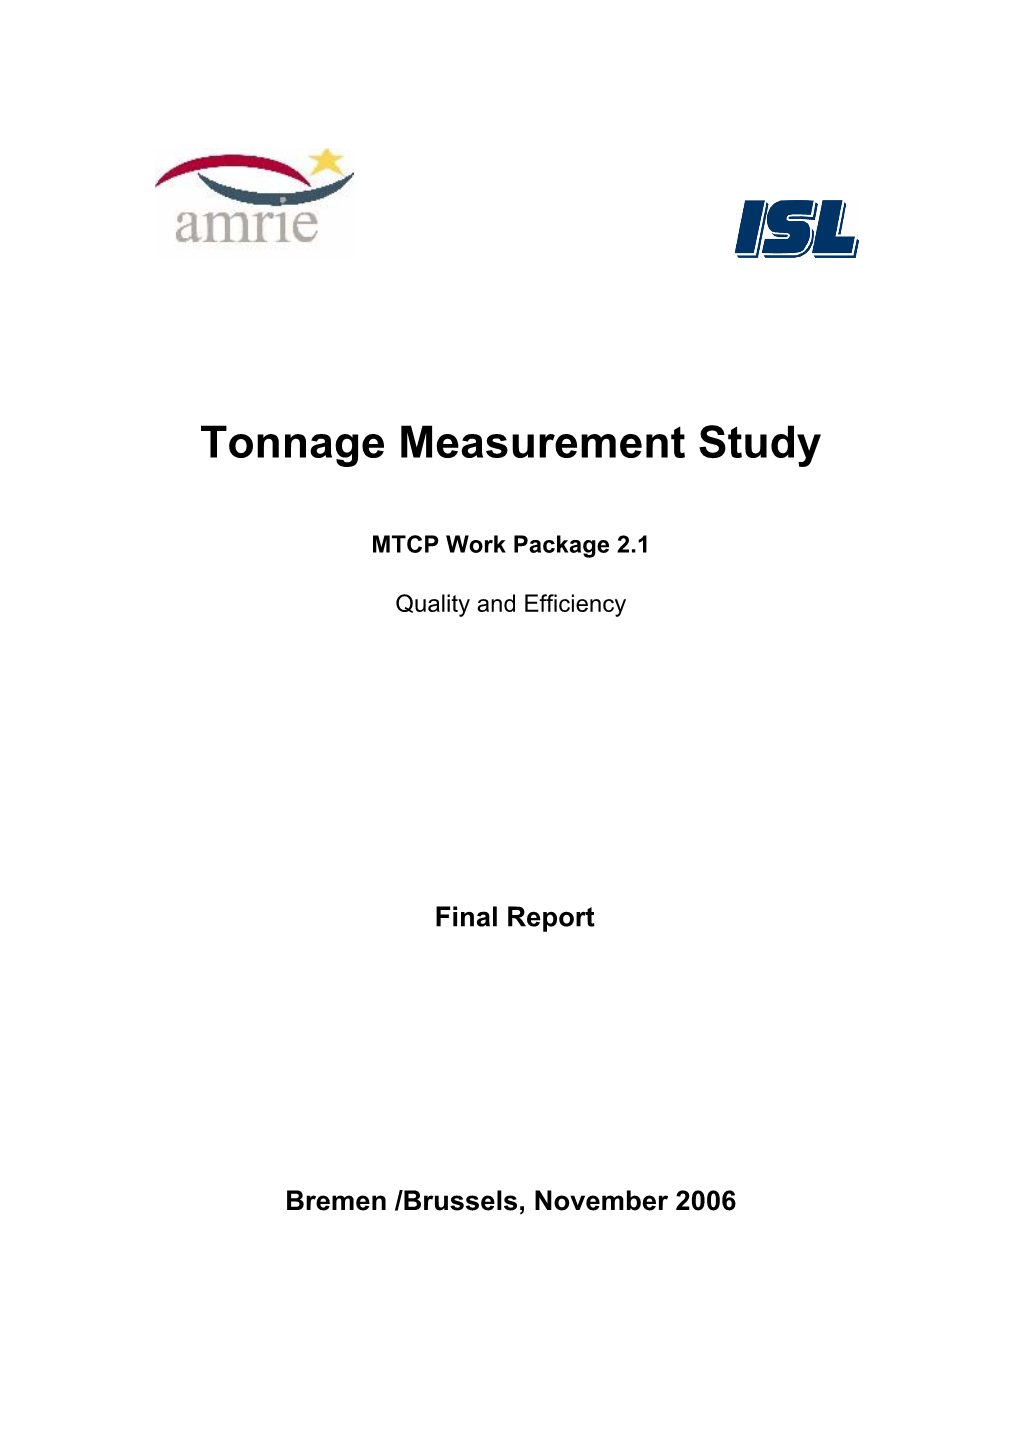 Draft Final Report on Mtcp Tonnage Measurement Study